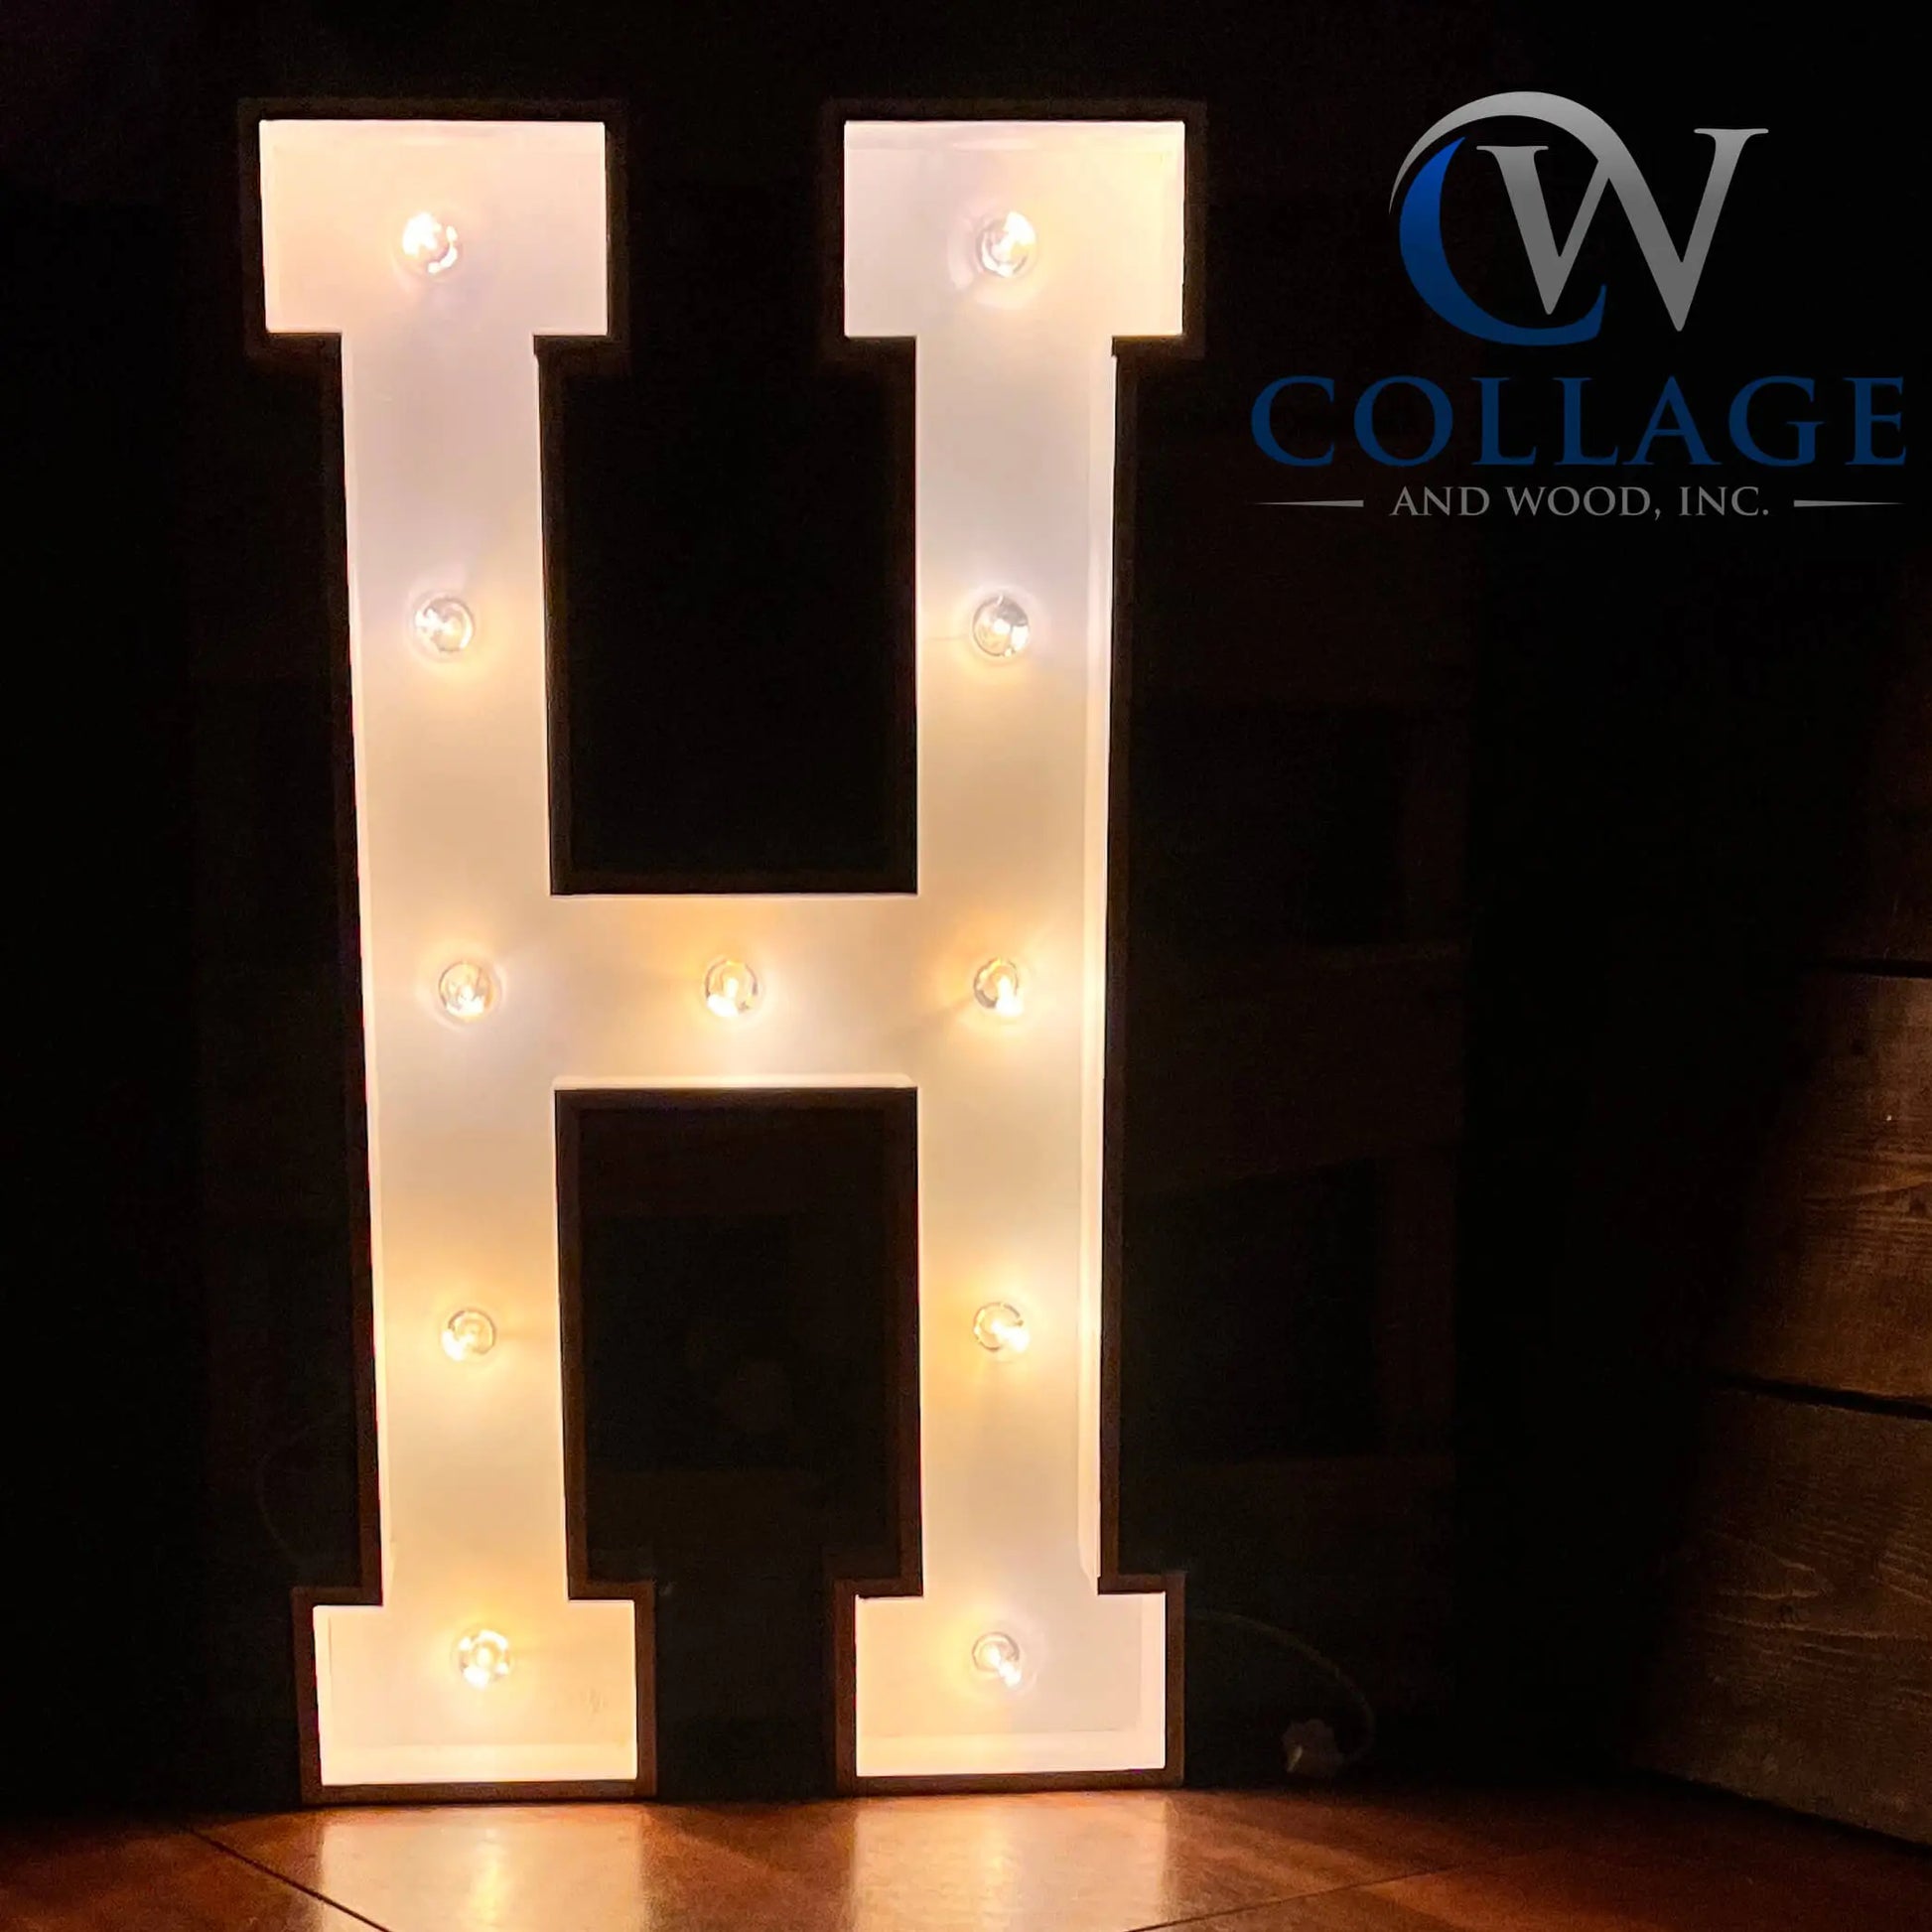 Handsome wooden marquee letter H, measuring an impressive 3 feet tall, in a sophisticated white finish, glowing with LED lights.